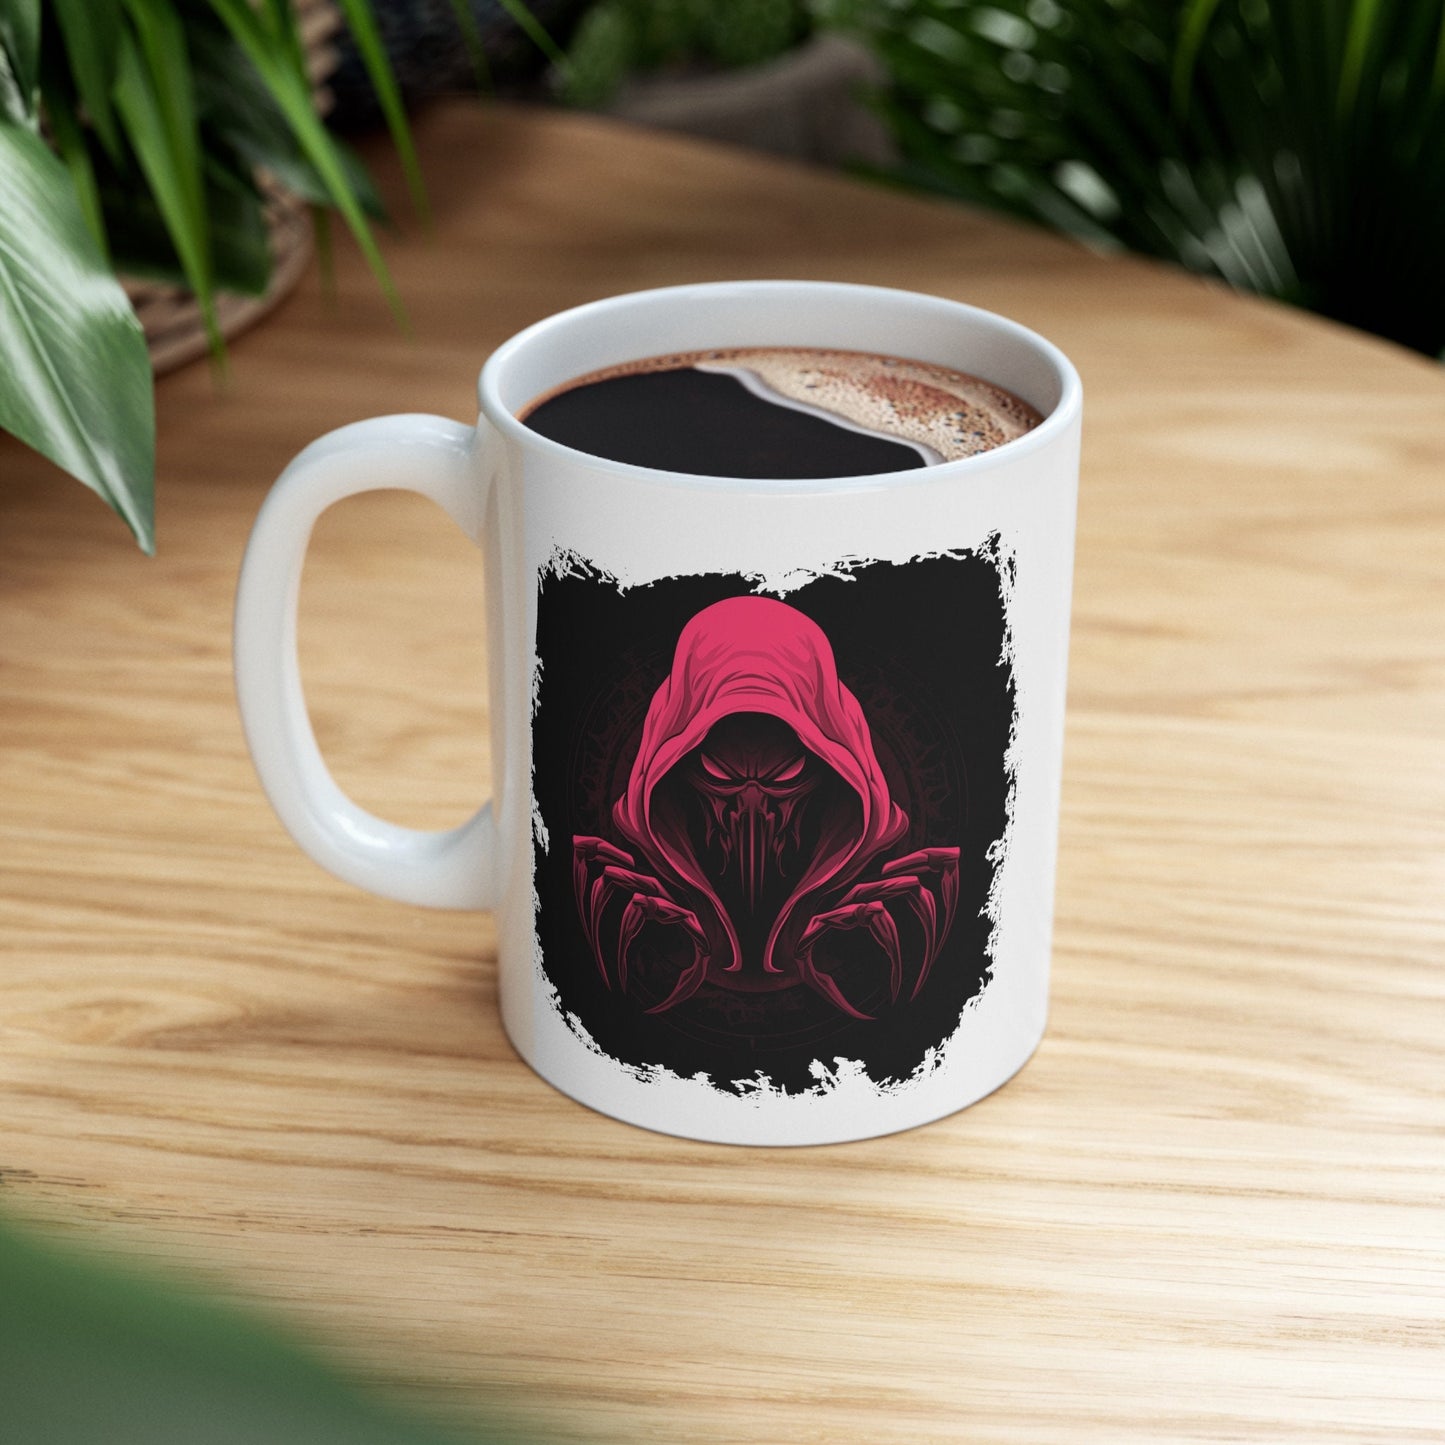 Hooded Scorpion Monster, Scary Creature with Hoodie, Coffee Mug with hooded character, Evil Demon, frightening beast. Horrifying nightmare